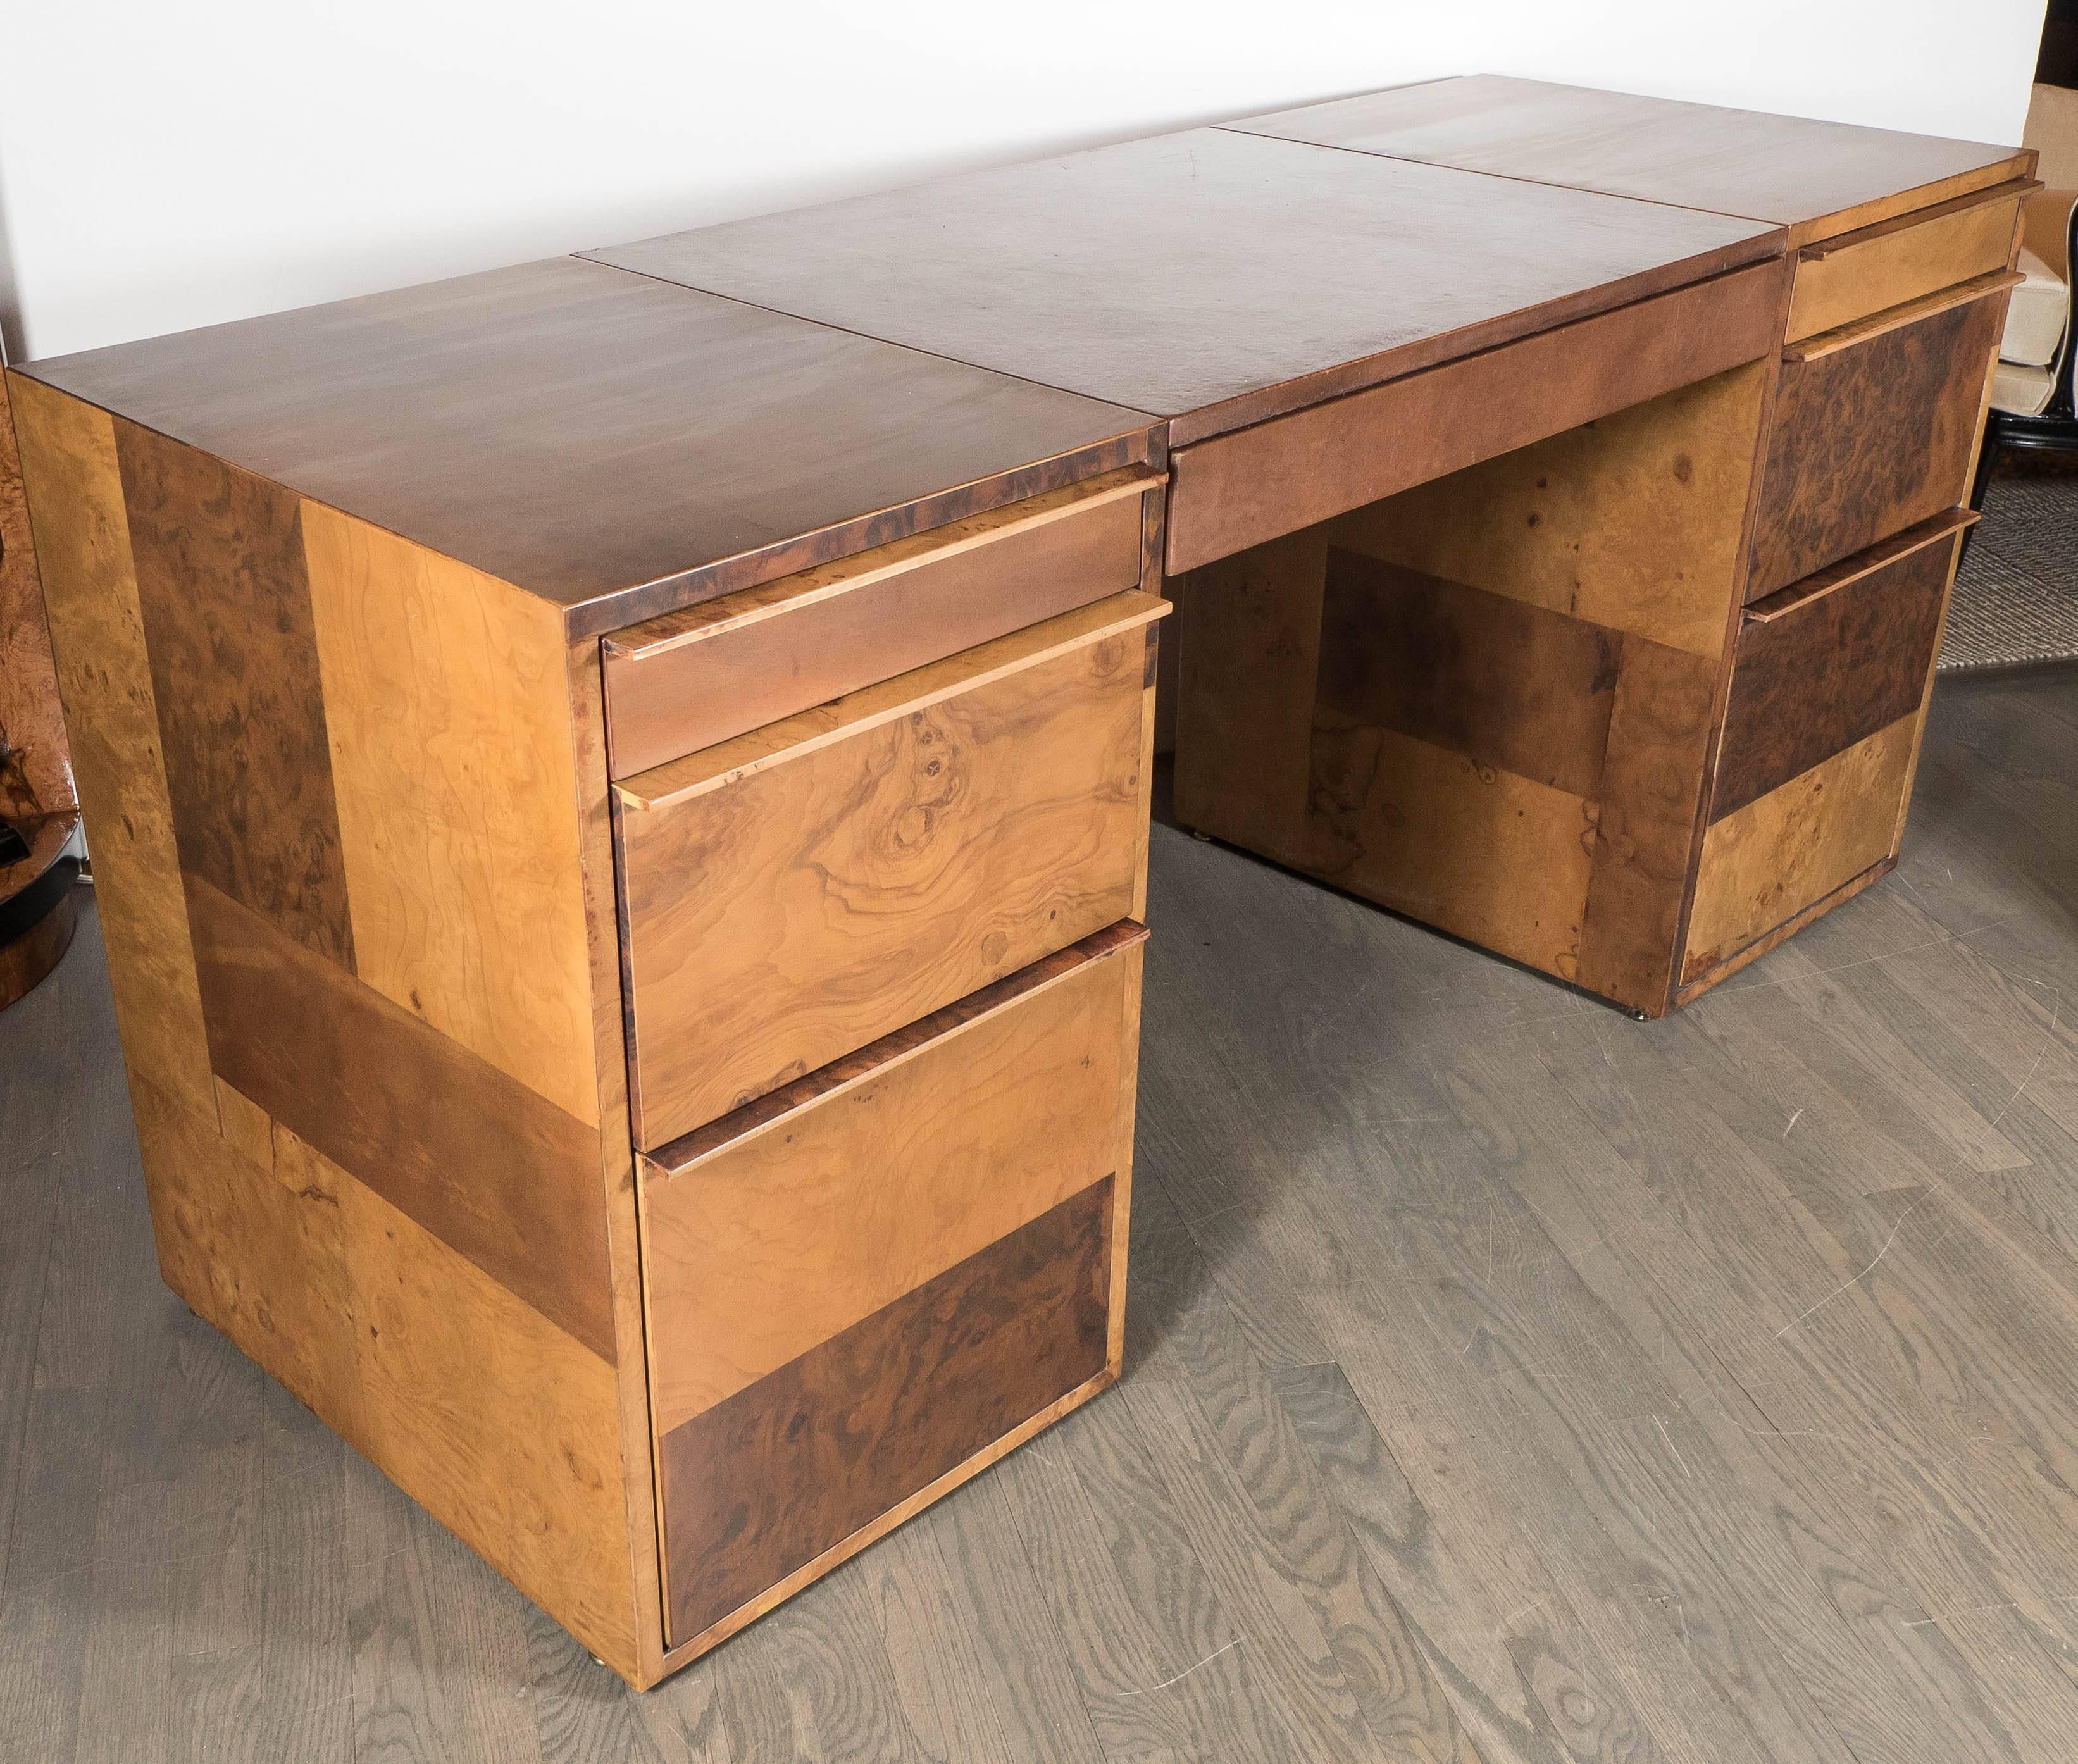 Inlay Mid-Century Modernist Executive Desk in Exotic Two-Toned Burl Wood